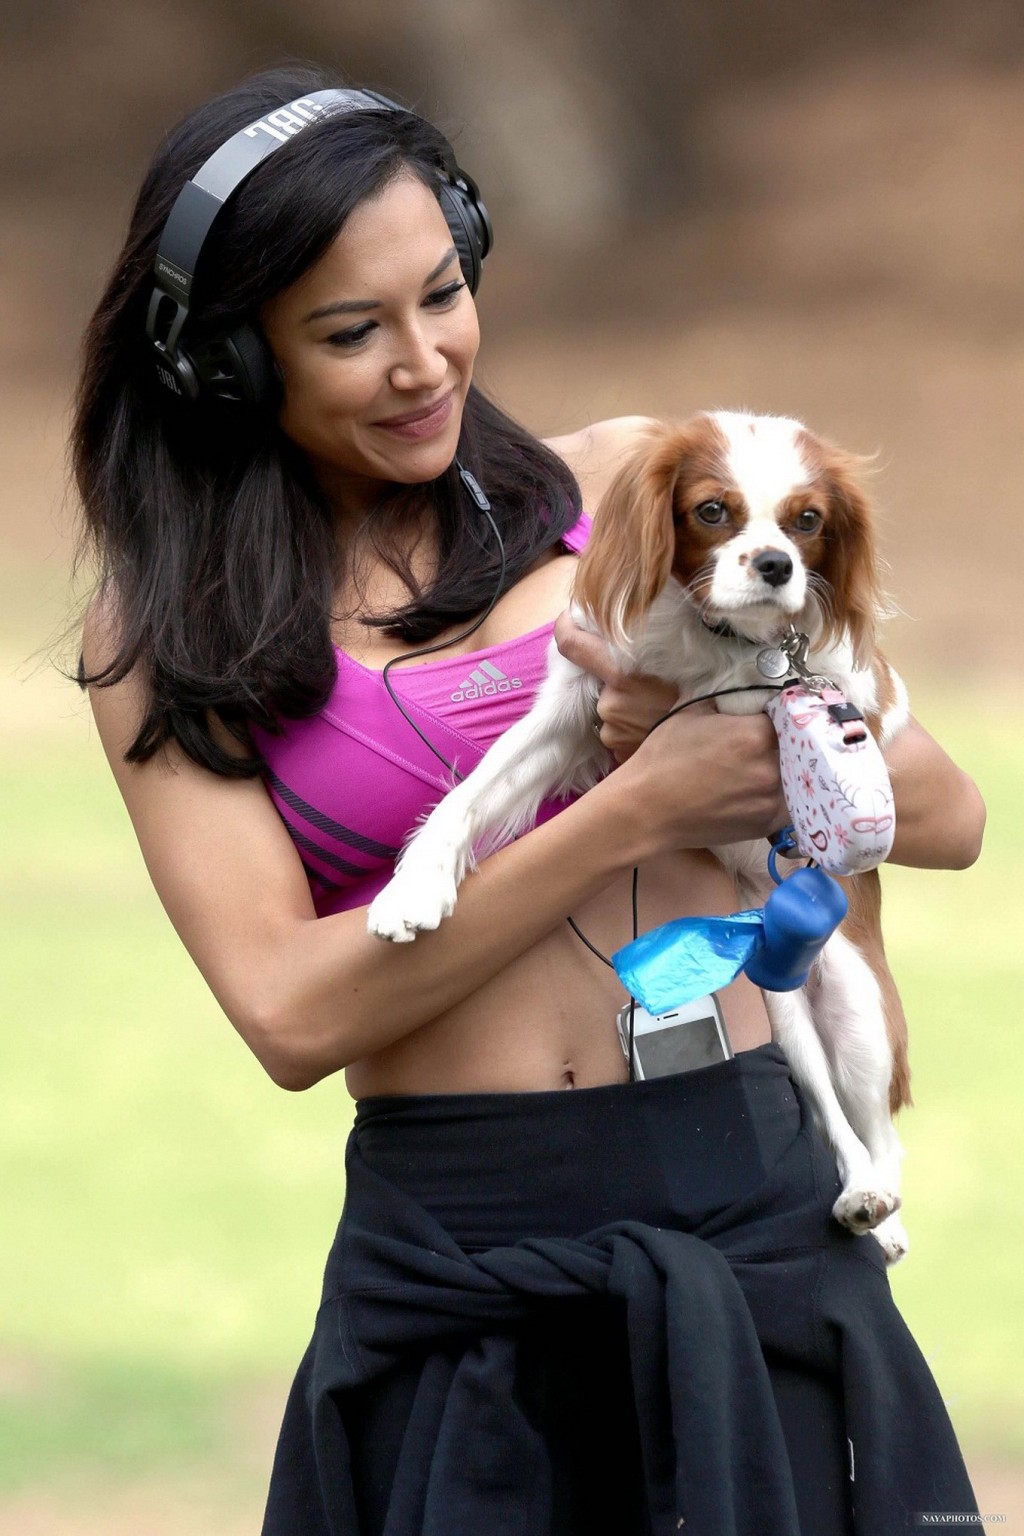 Naya Rivera wearing sports bra and tights while walking her dog at Griffith Park #75211207